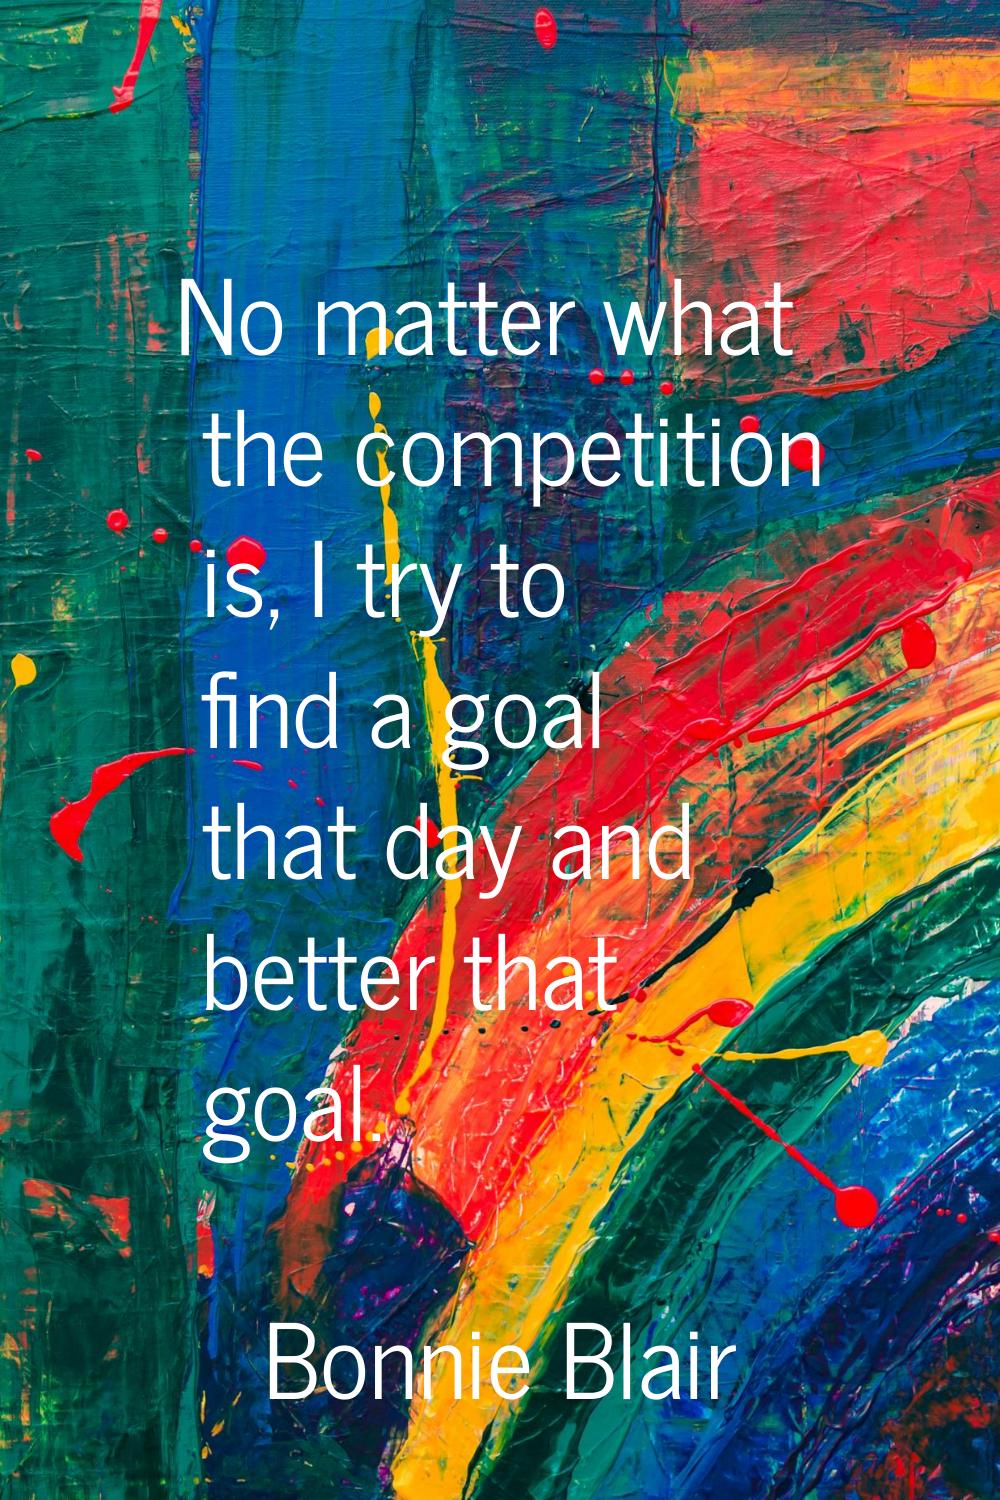 No matter what the competition is, I try to find a goal that day and better that goal.